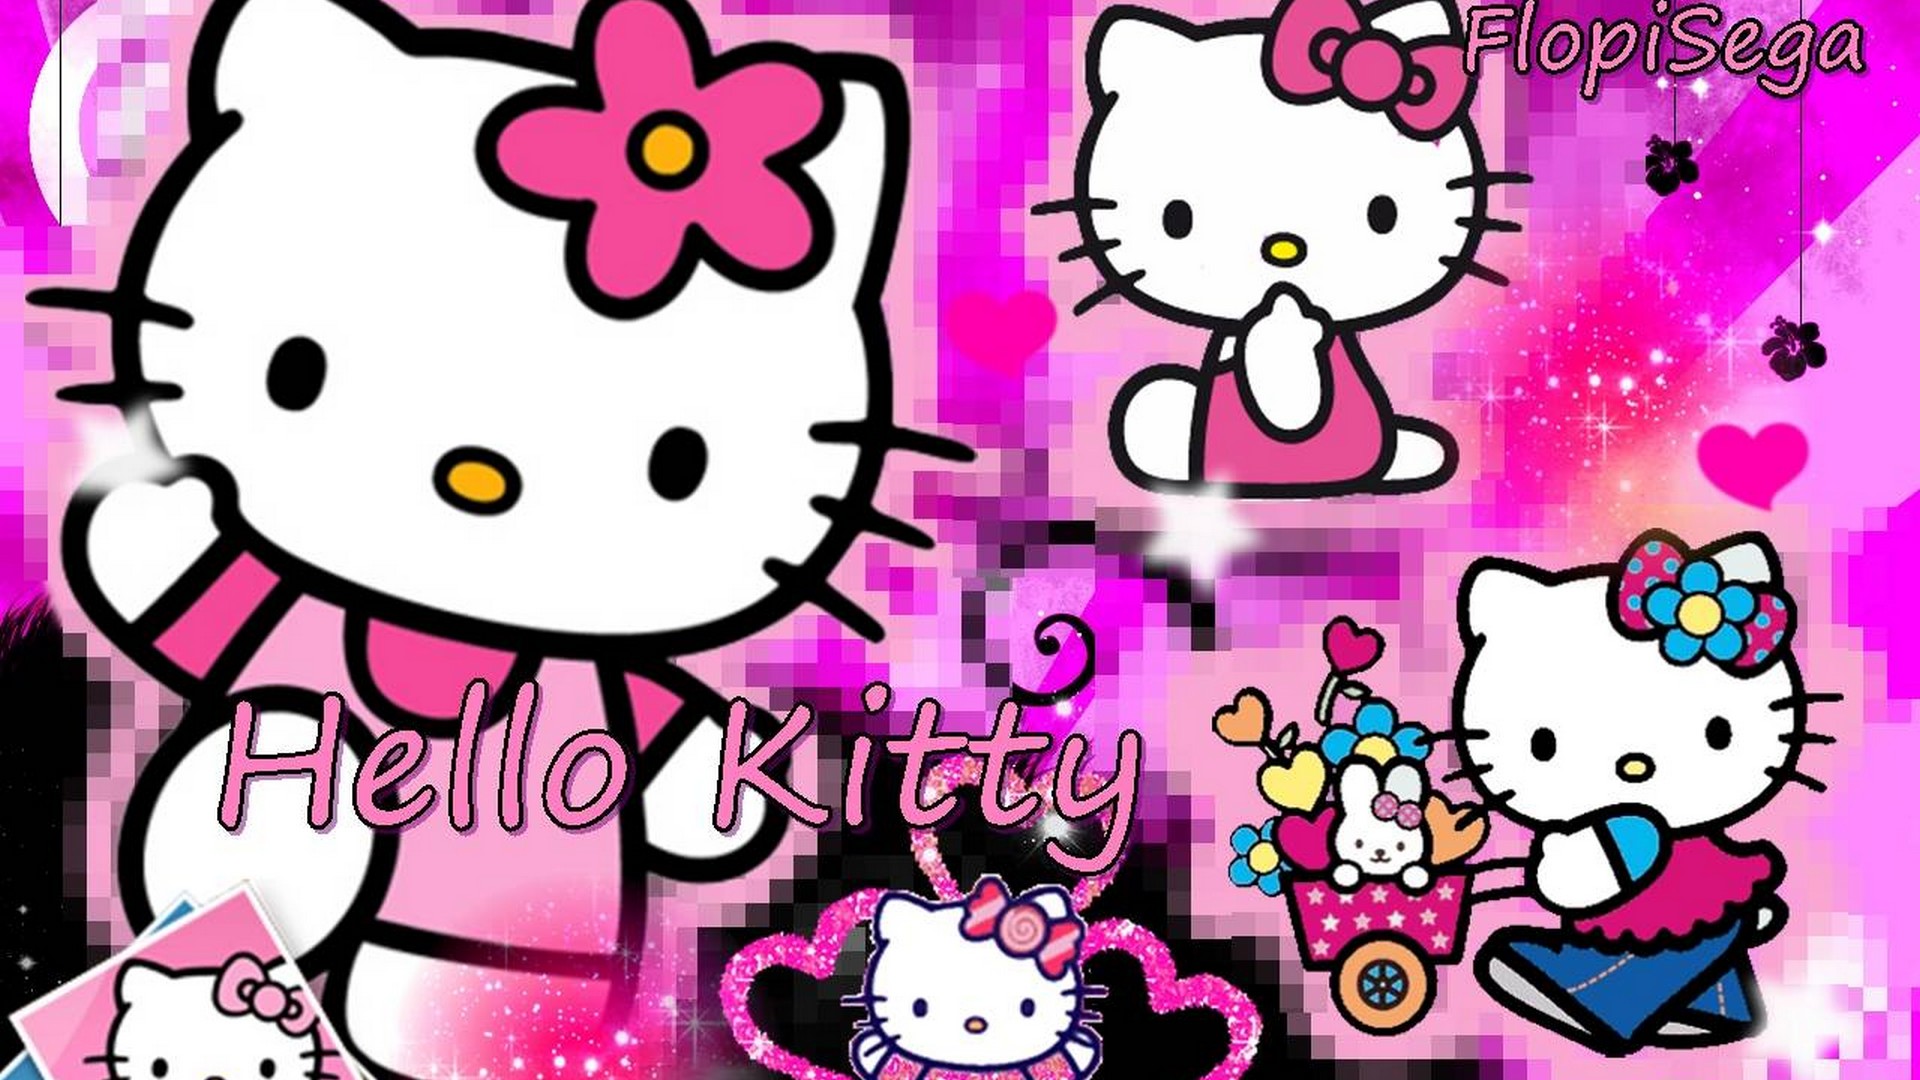 Hello Kitty Images Wallpaper For Desktop with image resolution 1920x1080 pixel. You can use this wallpaper as background for your desktop Computer Screensavers, Android or iPhone smartphones